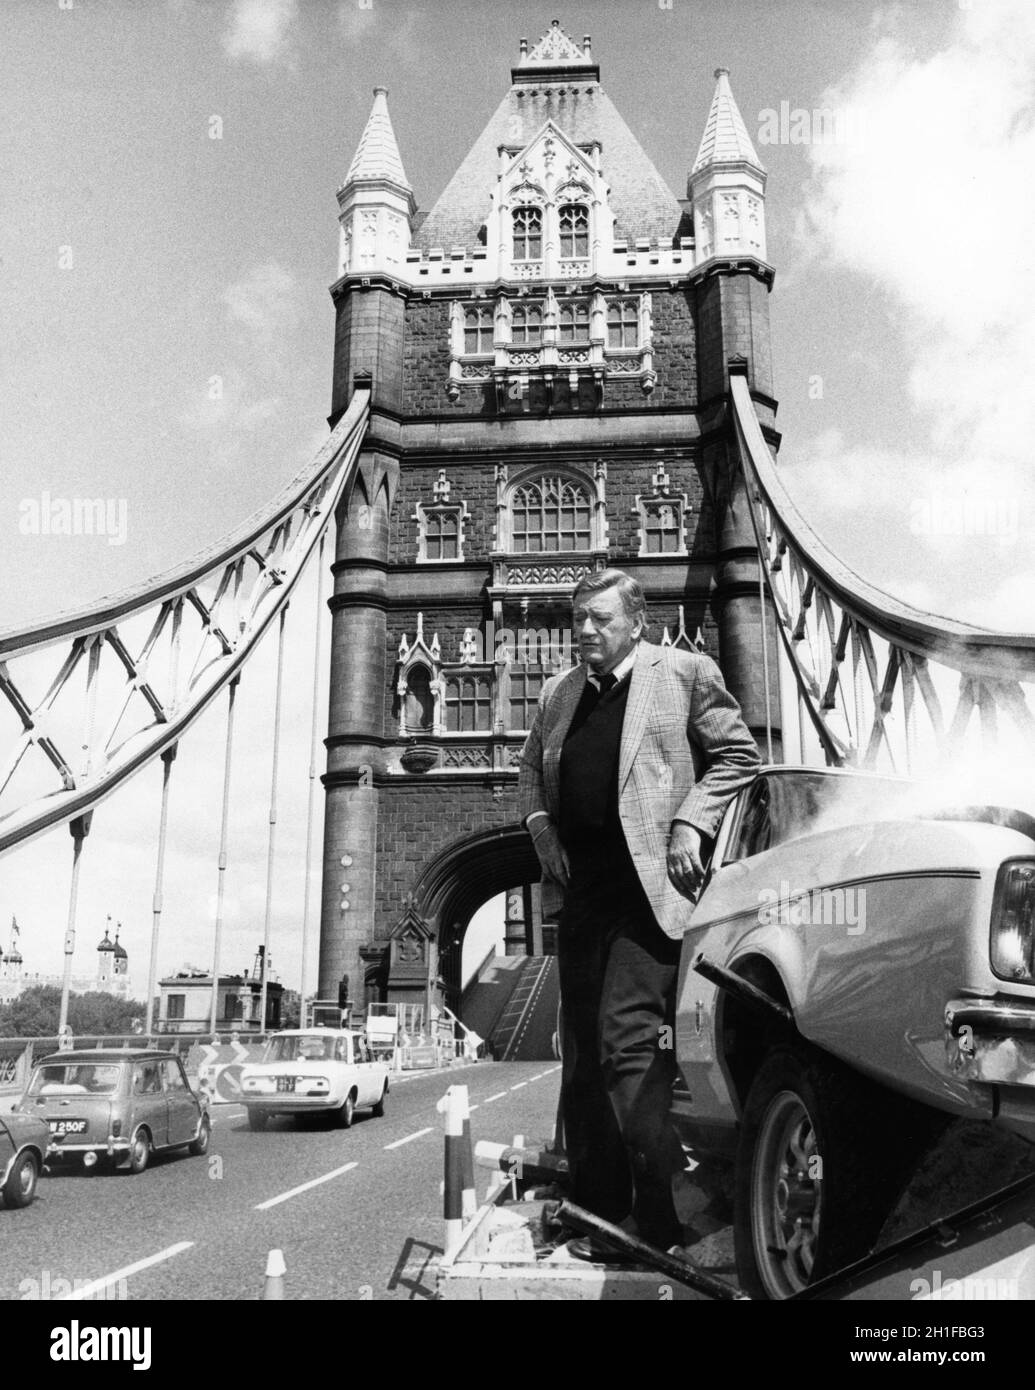 JOHN WAYNE as Chicago Police Lieutenant publicity portrait next to crashed car on Tower Bridge in London in BRANNIGAN 1975 director DOUGLAS HICKOX UK - USA co-production Wellborn / Levy - Gardner -Laven / United Artists Stock Photo